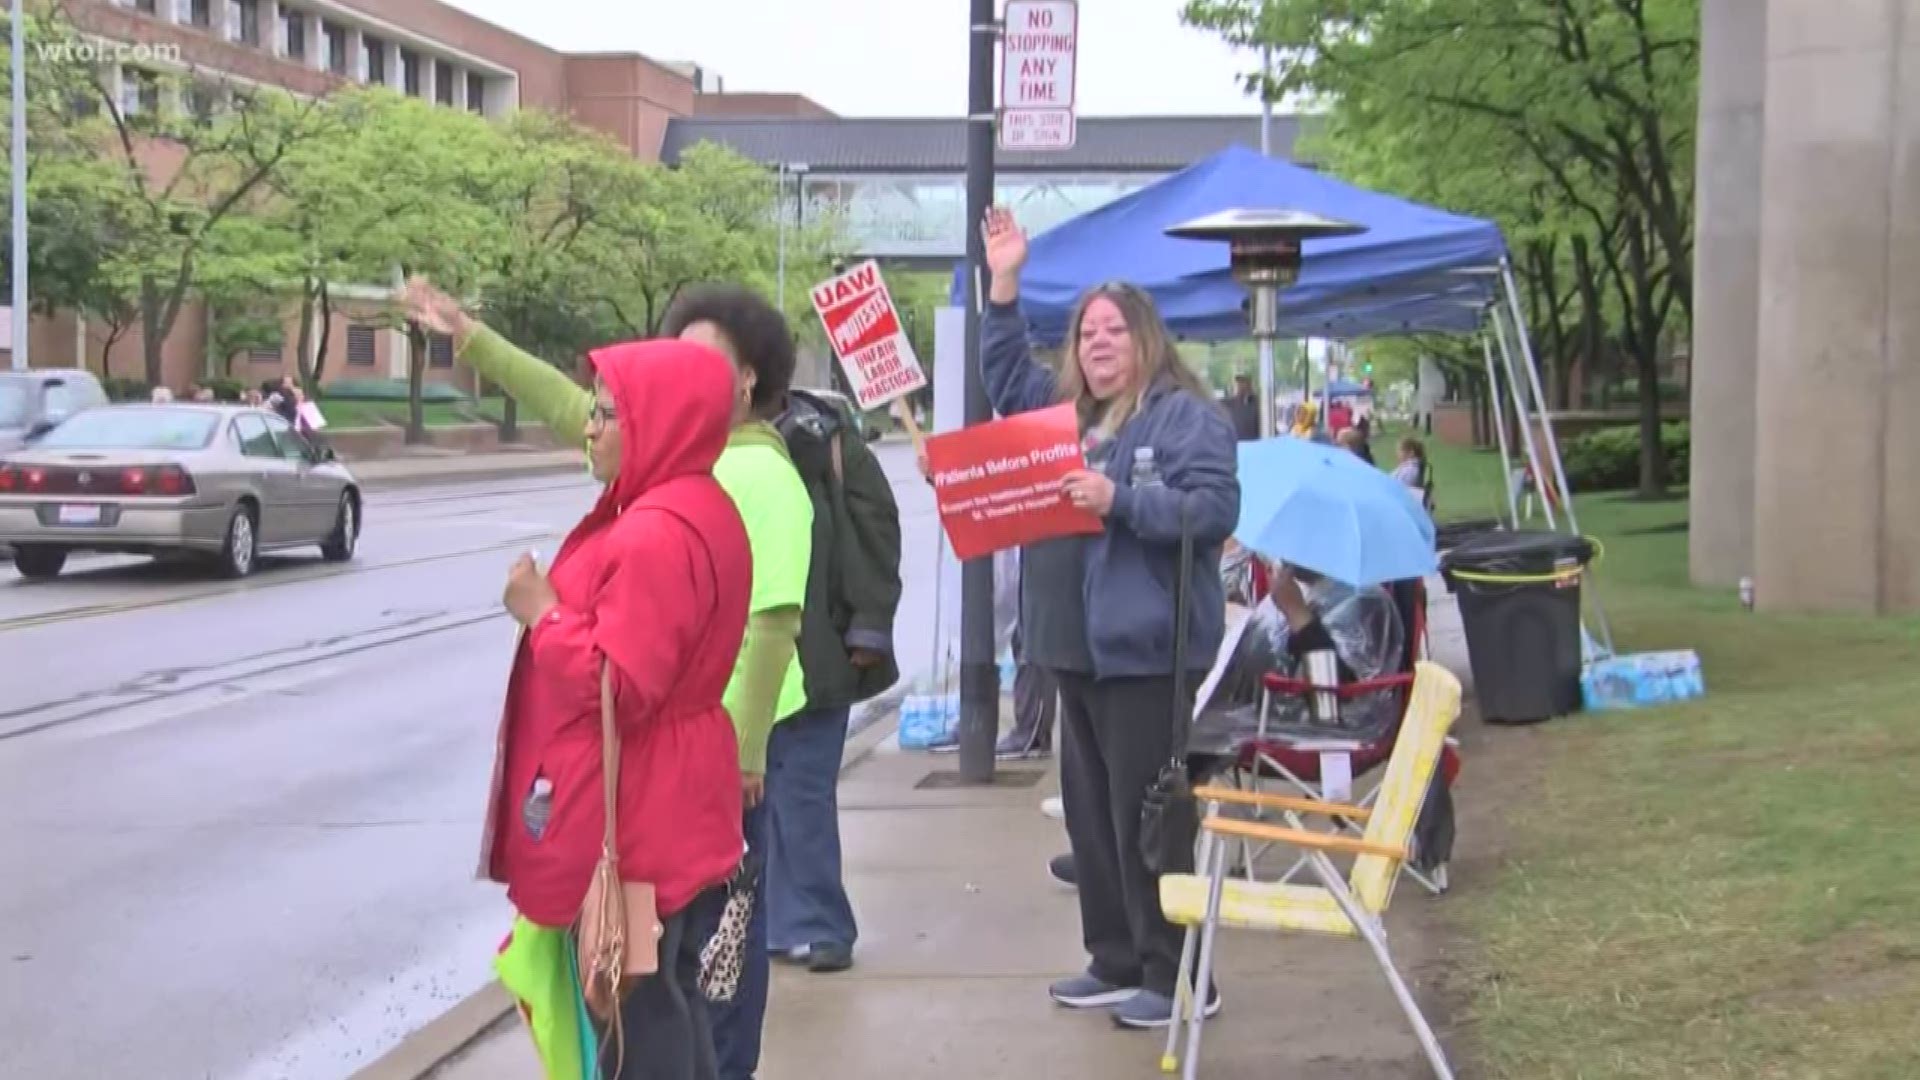 Striking health care workers want better health care package, changes in on-call policy; strike has been underway since May 6